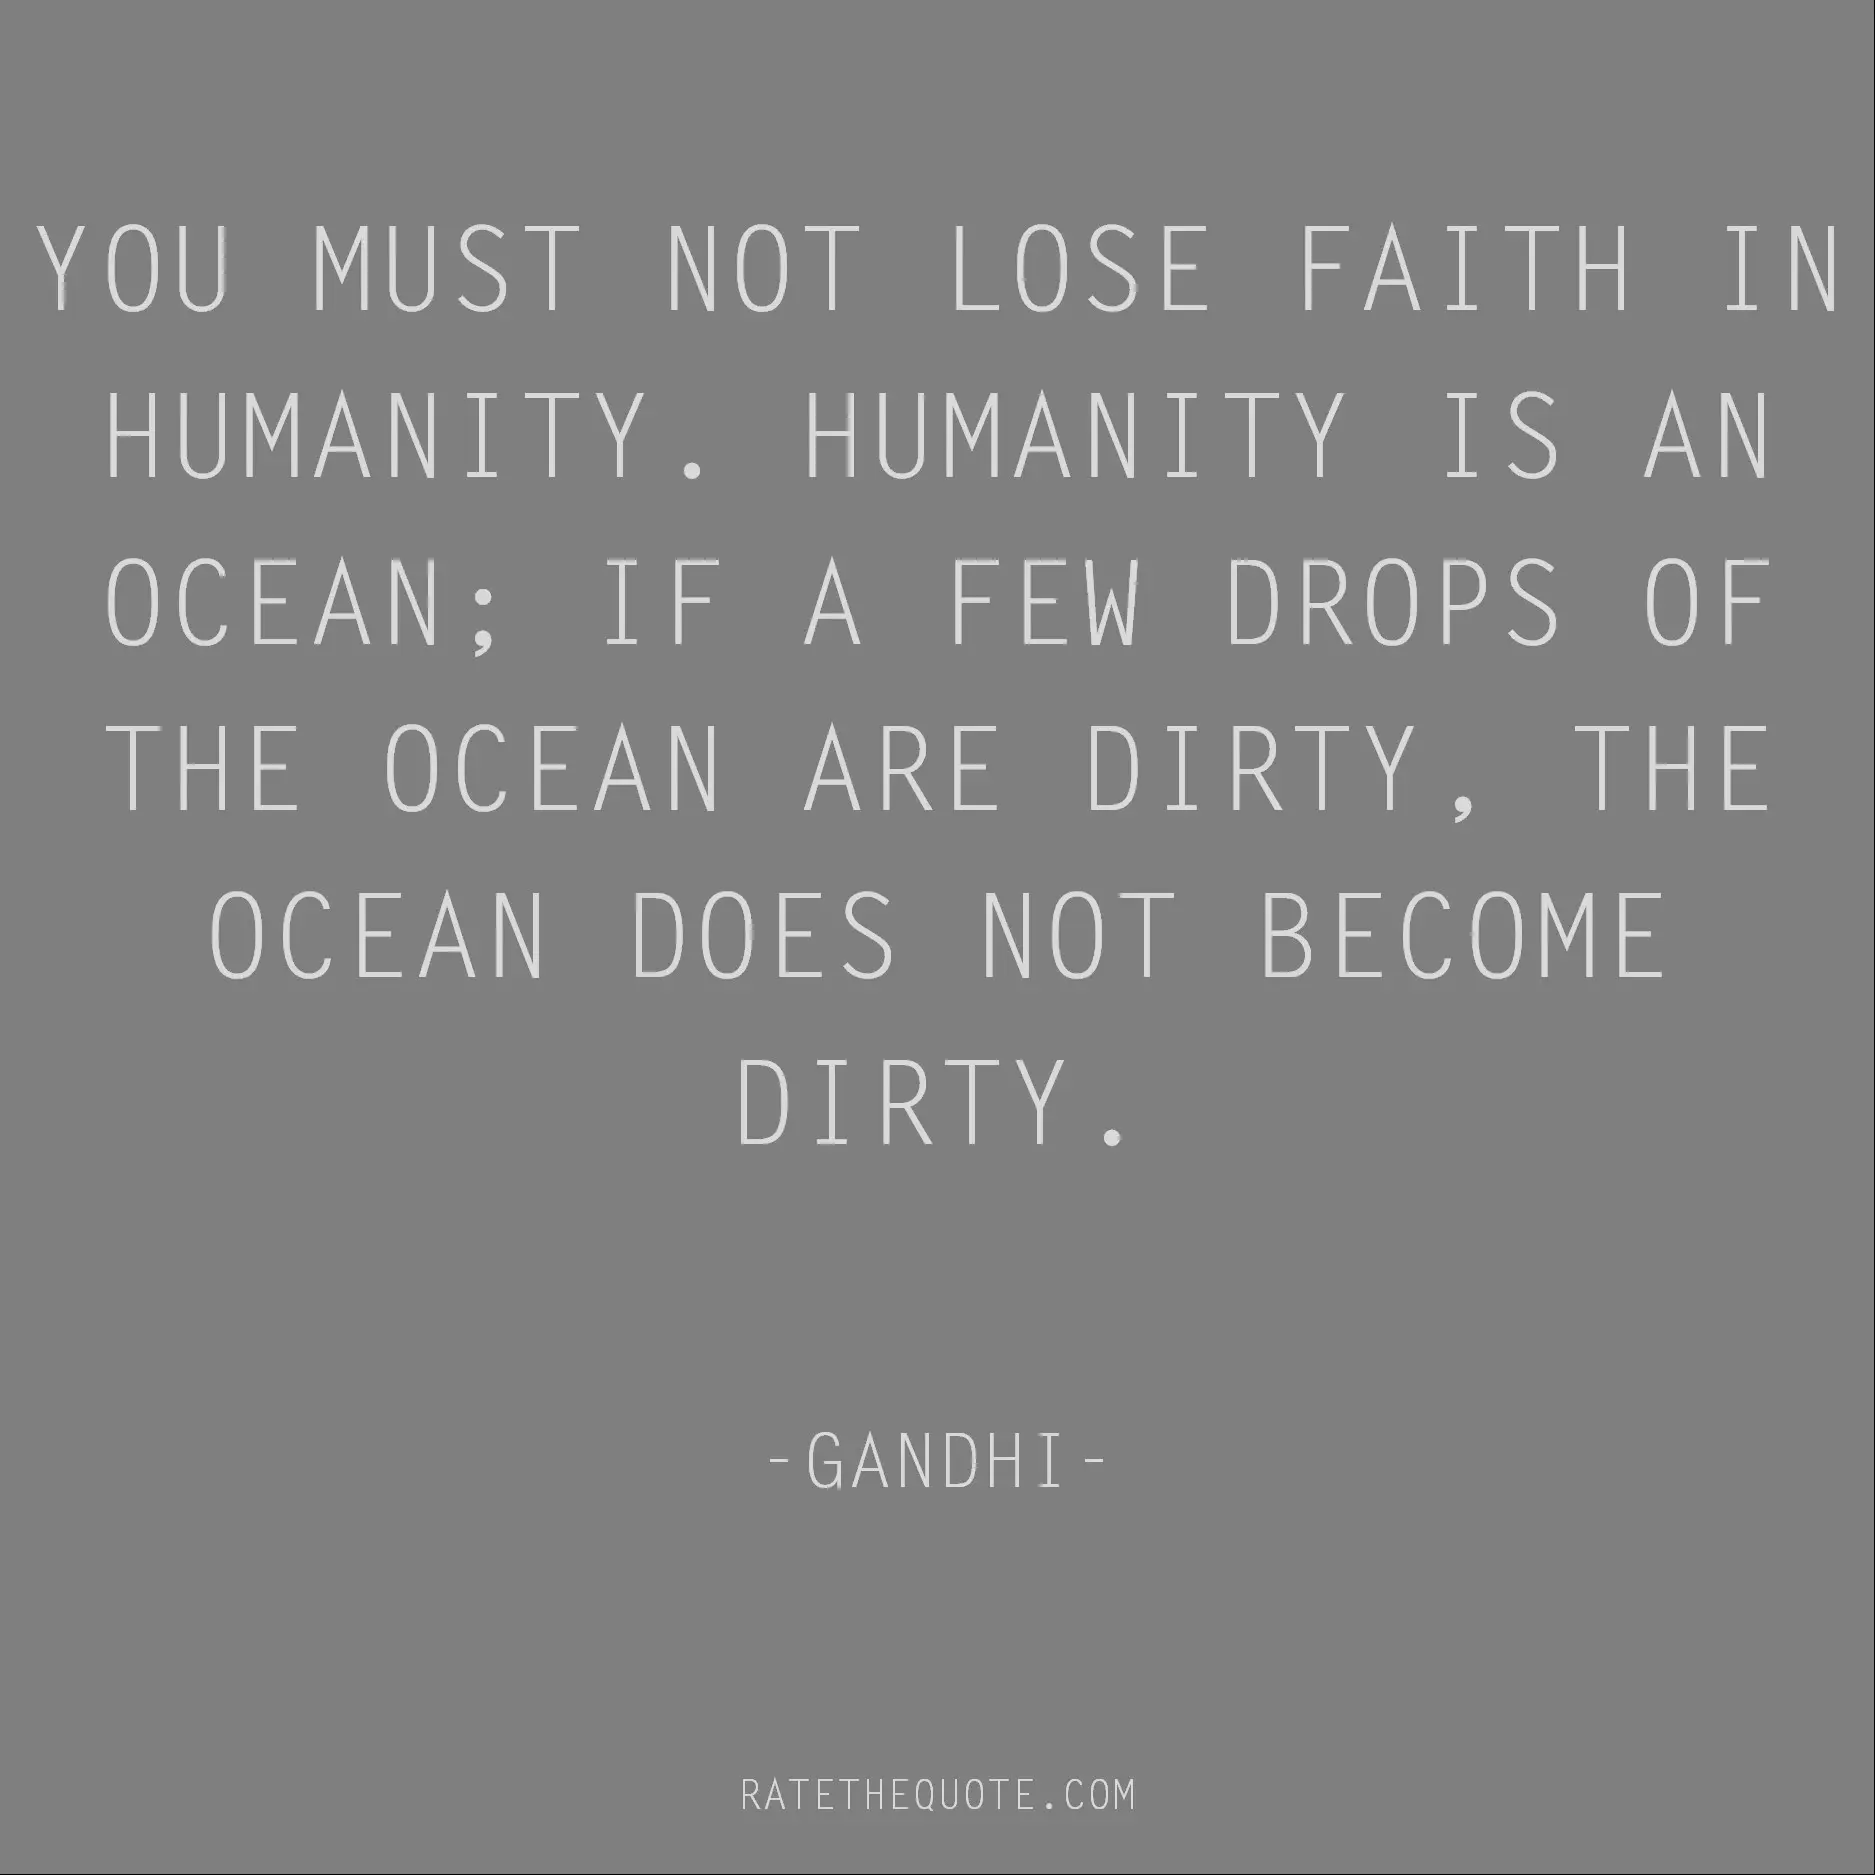 Quotes by Gandhi